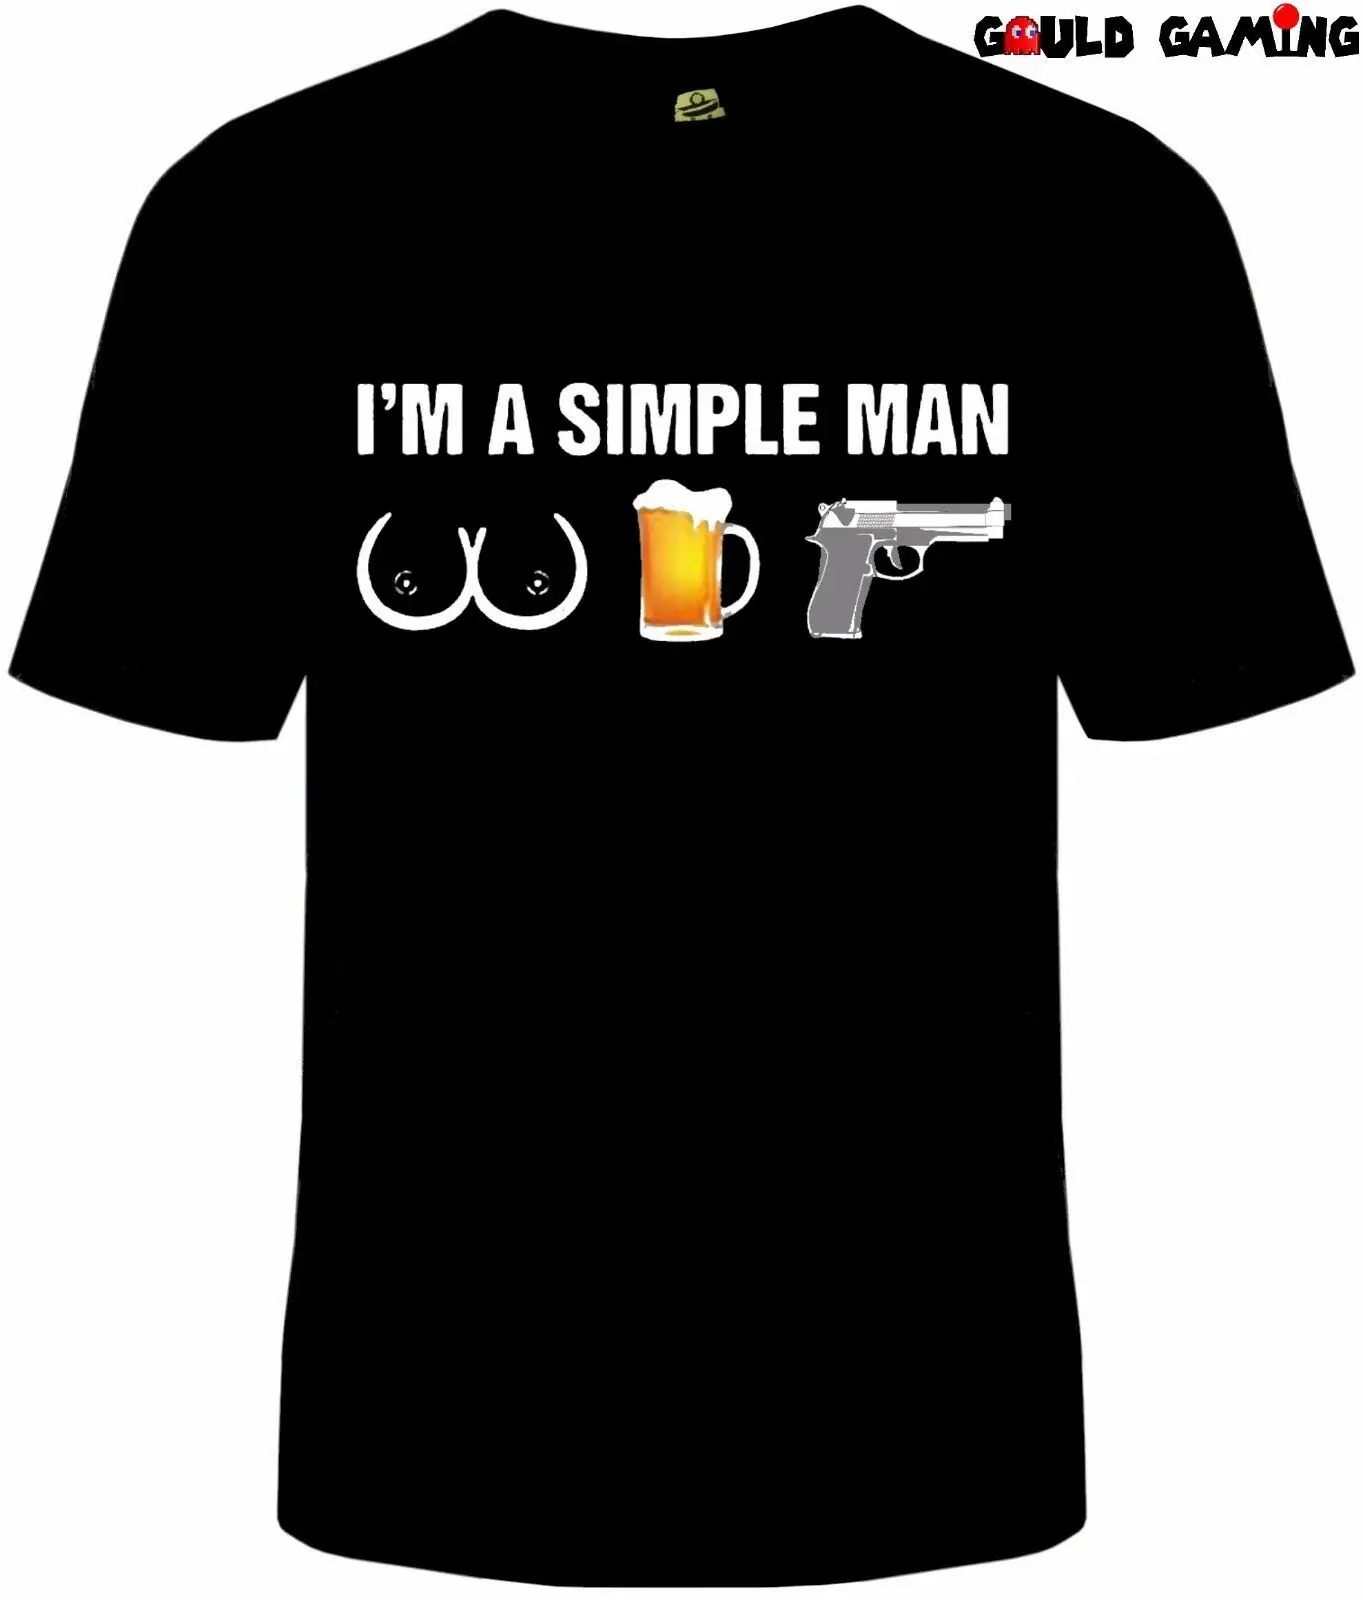 2019 Fashion I'M A Simple Man T-Shirt Unisex Cotton Adult Funny Pew Nra Gun Rights Freedom Tees